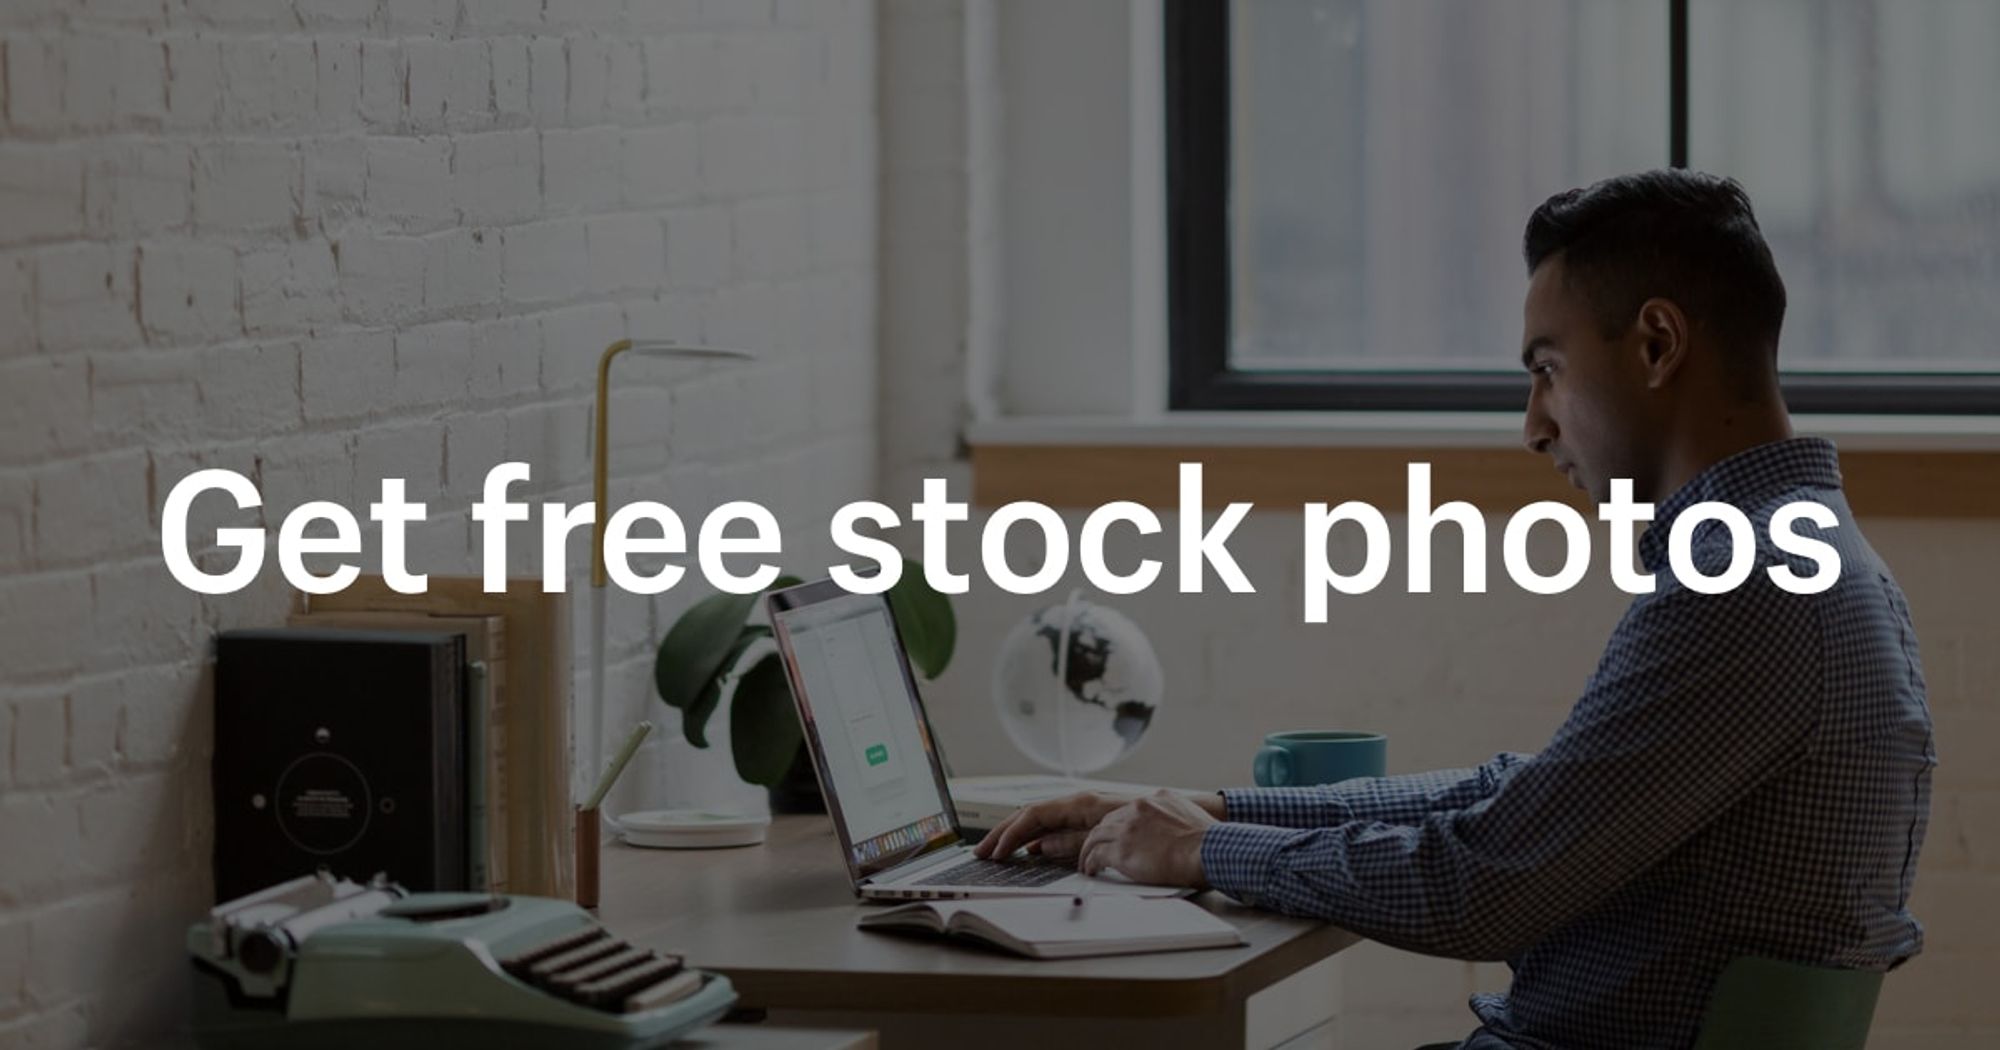 20000+ Free Stock Photos and Images for Websites & Commercial Use